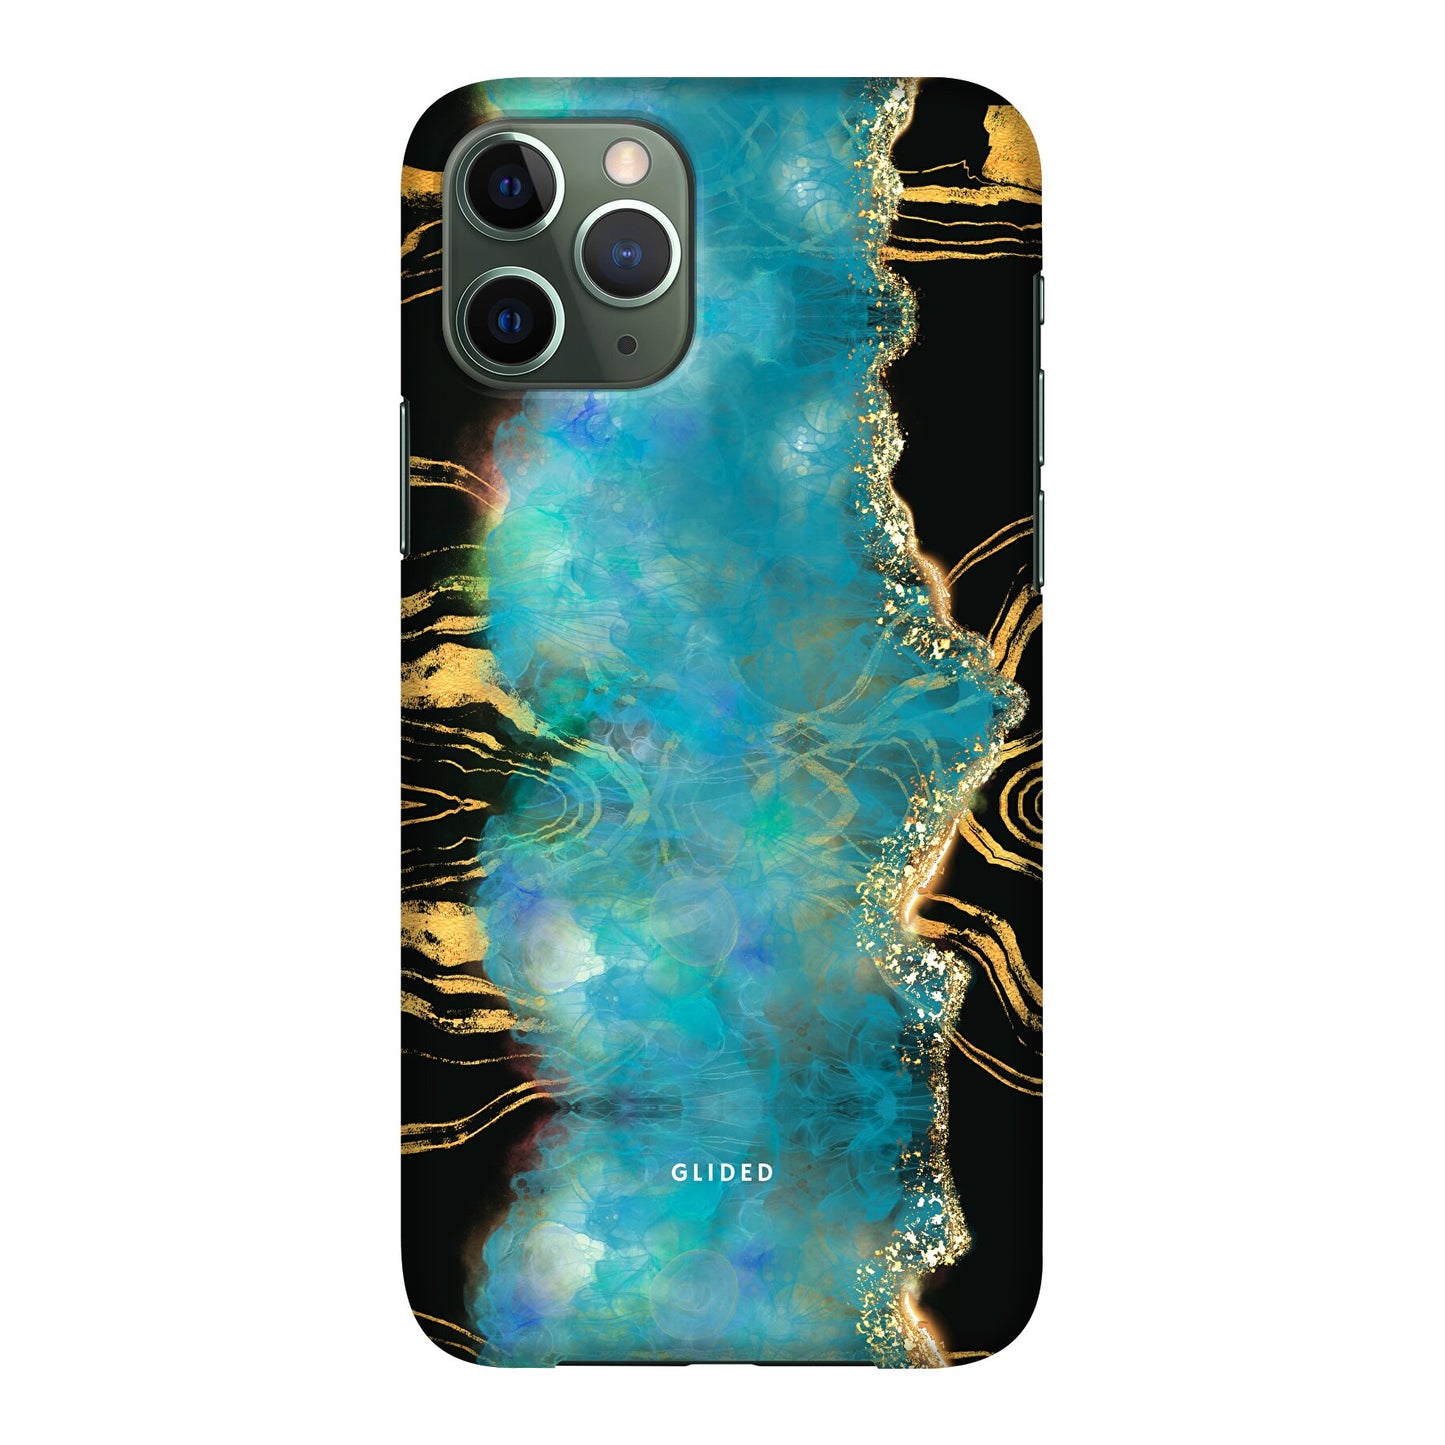 Waterly - iPhone 11 Pro Handyhülle Hard Case